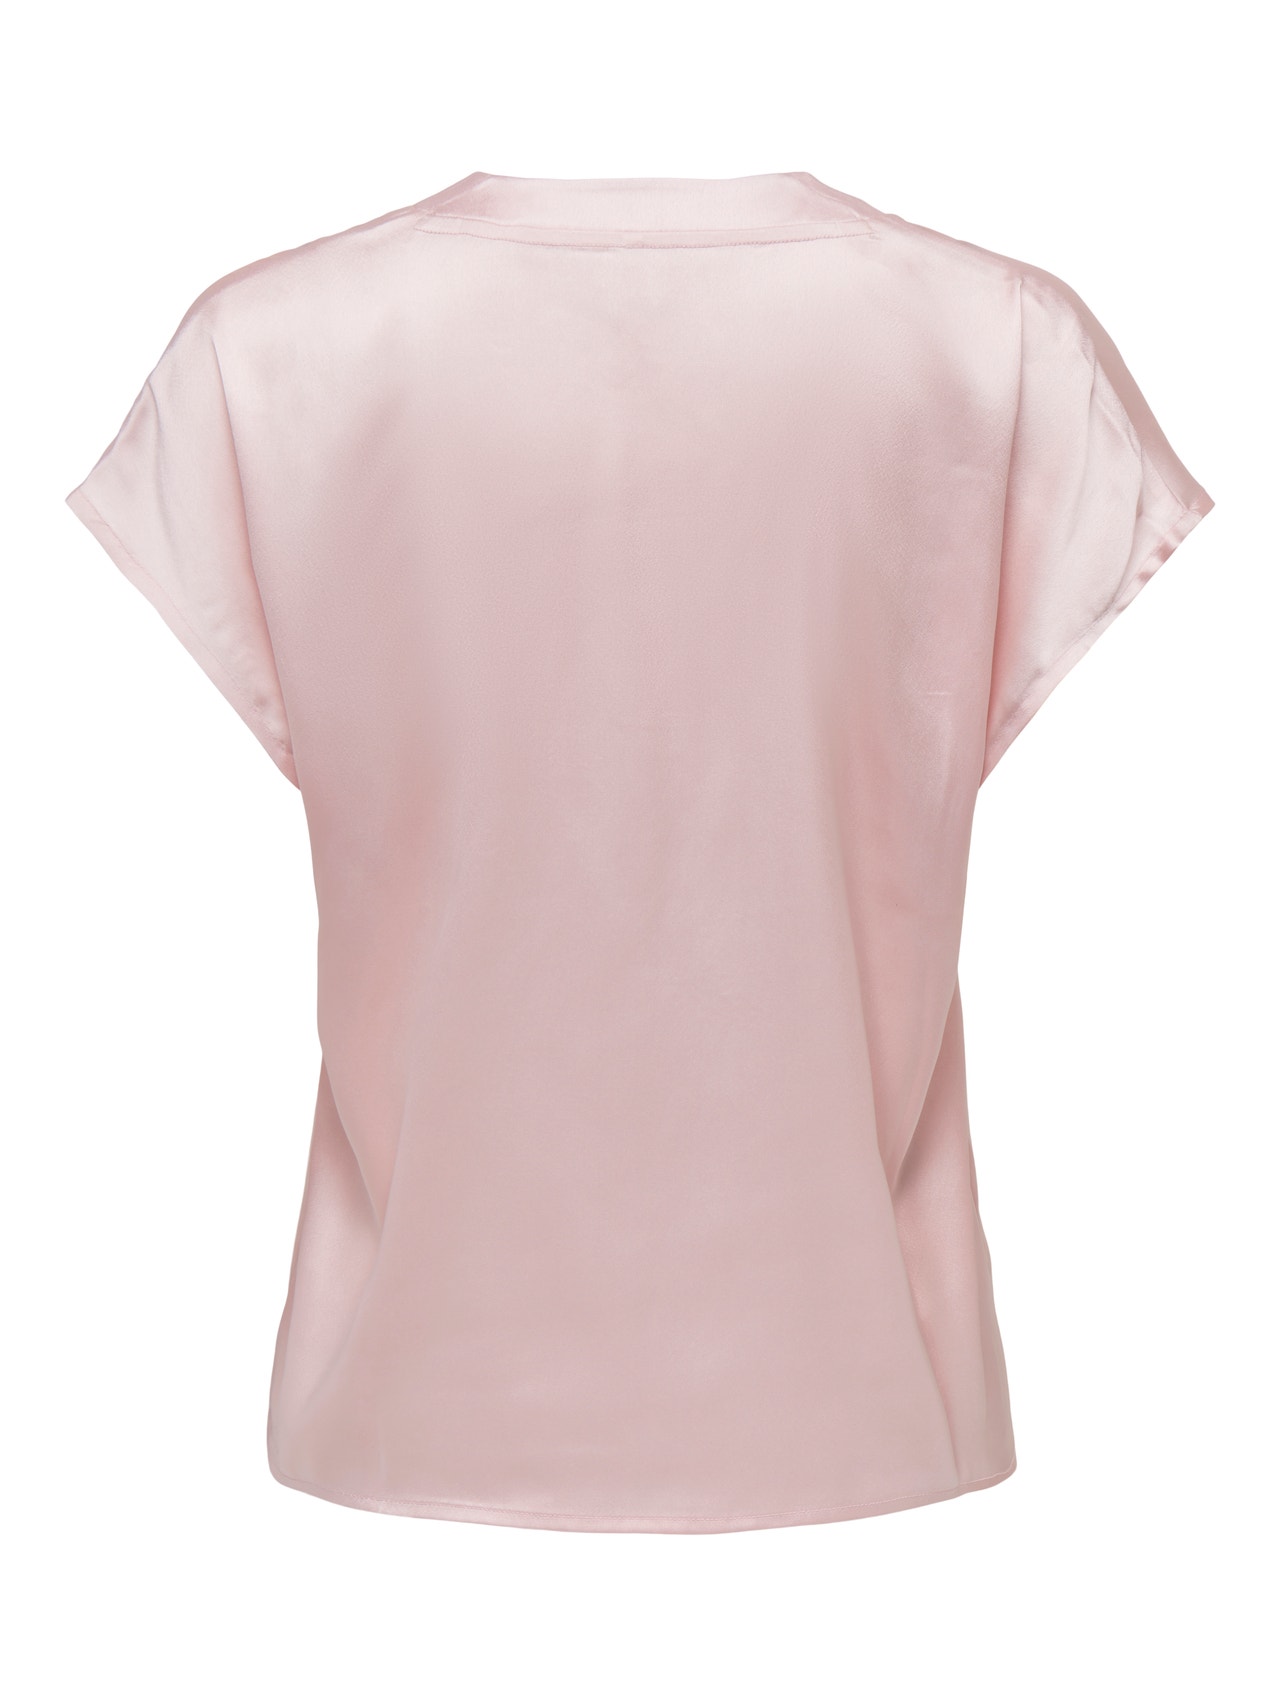 ONLY V-neck sateen top -Peach Whip - 15294053